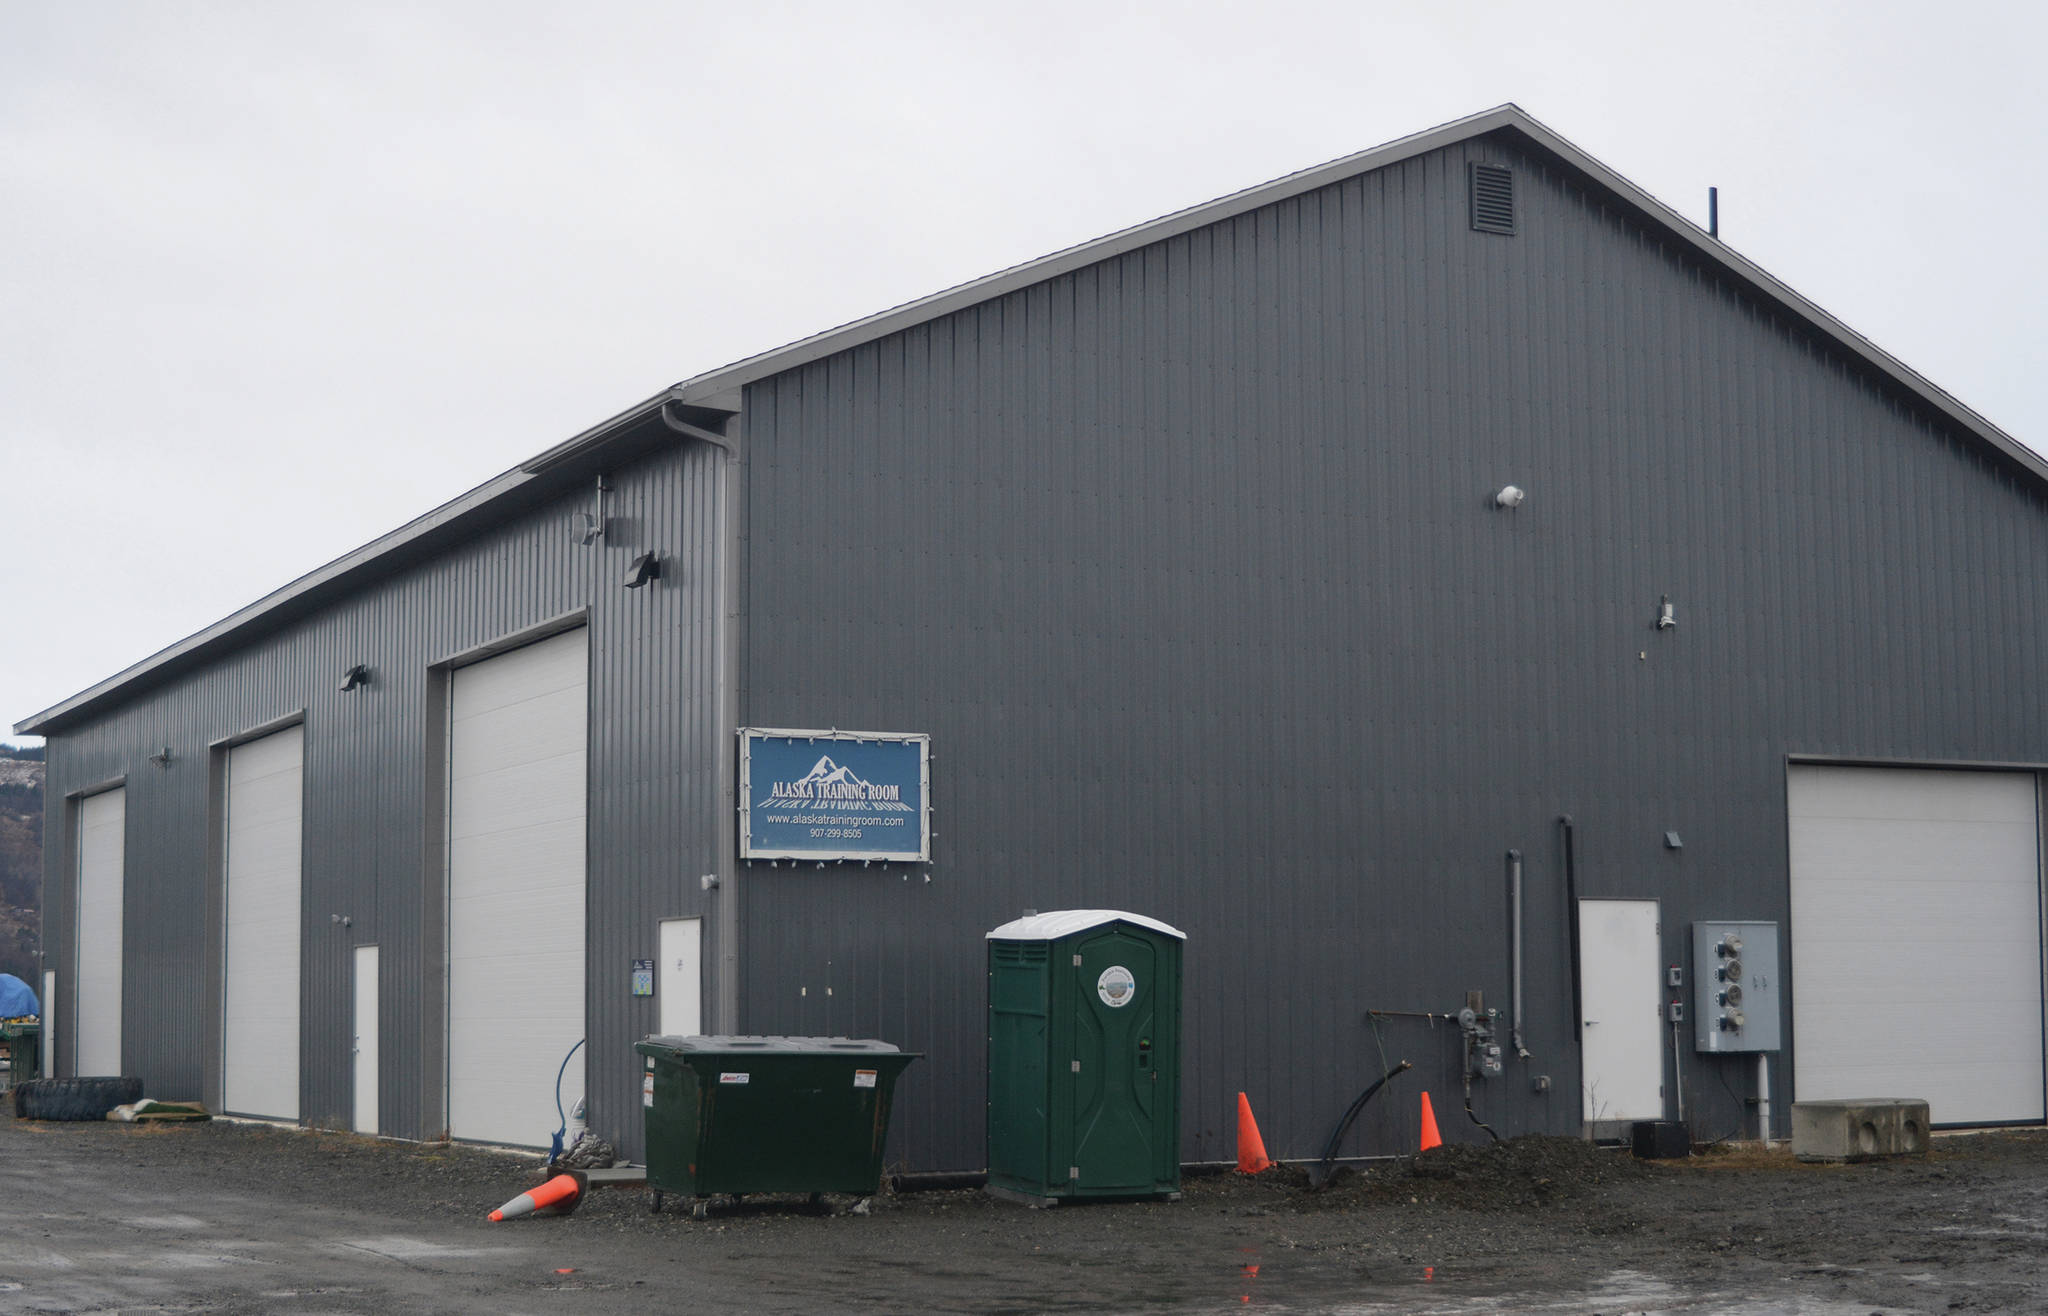 Alaska Loven It plans to operate a marijuana standard cultivation facility in this 5,000-square-foot building on Kachemak Drive shown in this January 2018 photo in Homer, Alaska. Alaska Training Room was in the building, but moved out in early 2018 to a new location on Ocean Drive. (Photo by Michael Armstrong, Homer News)